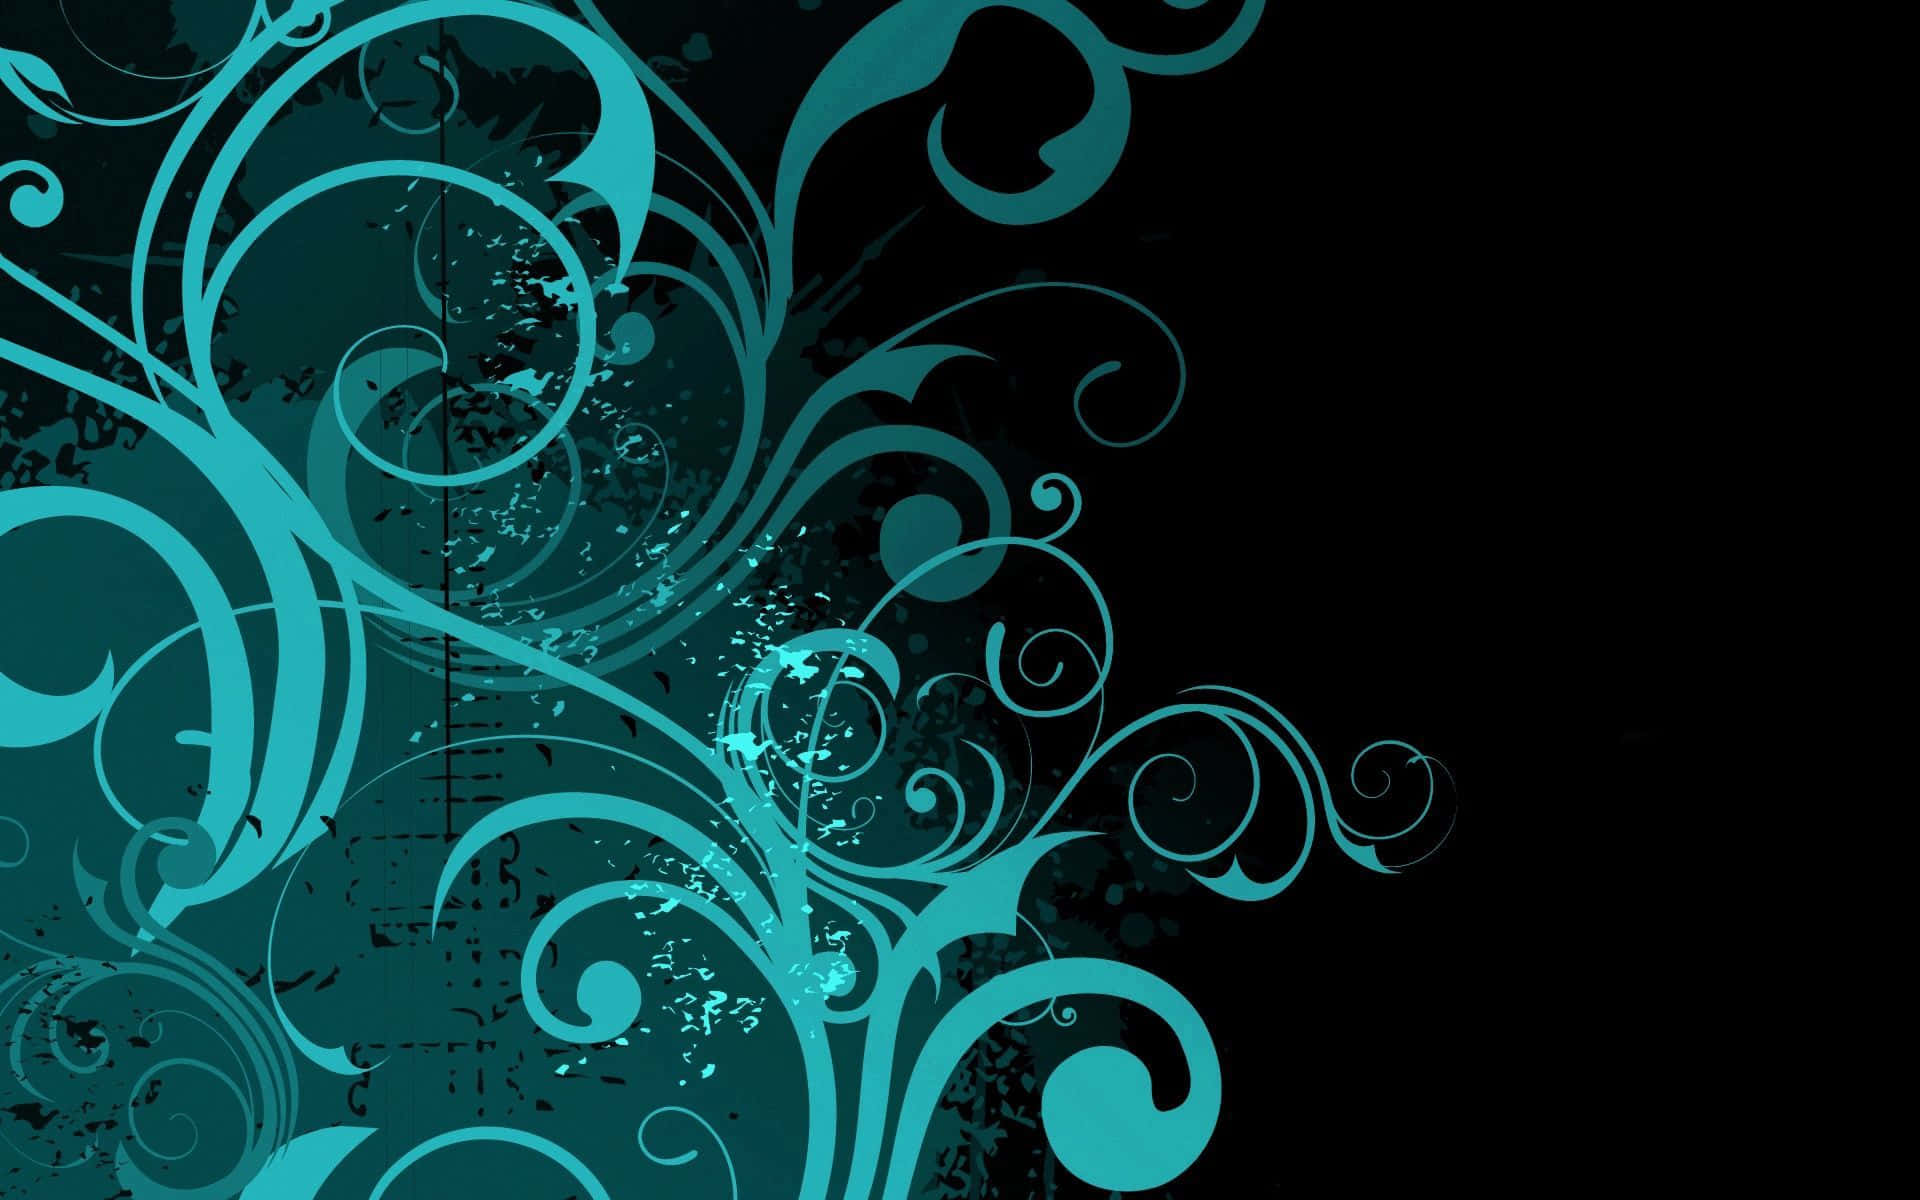 An Inviting Yet Elegant Wallpaper with Black and Teal Wallpaper